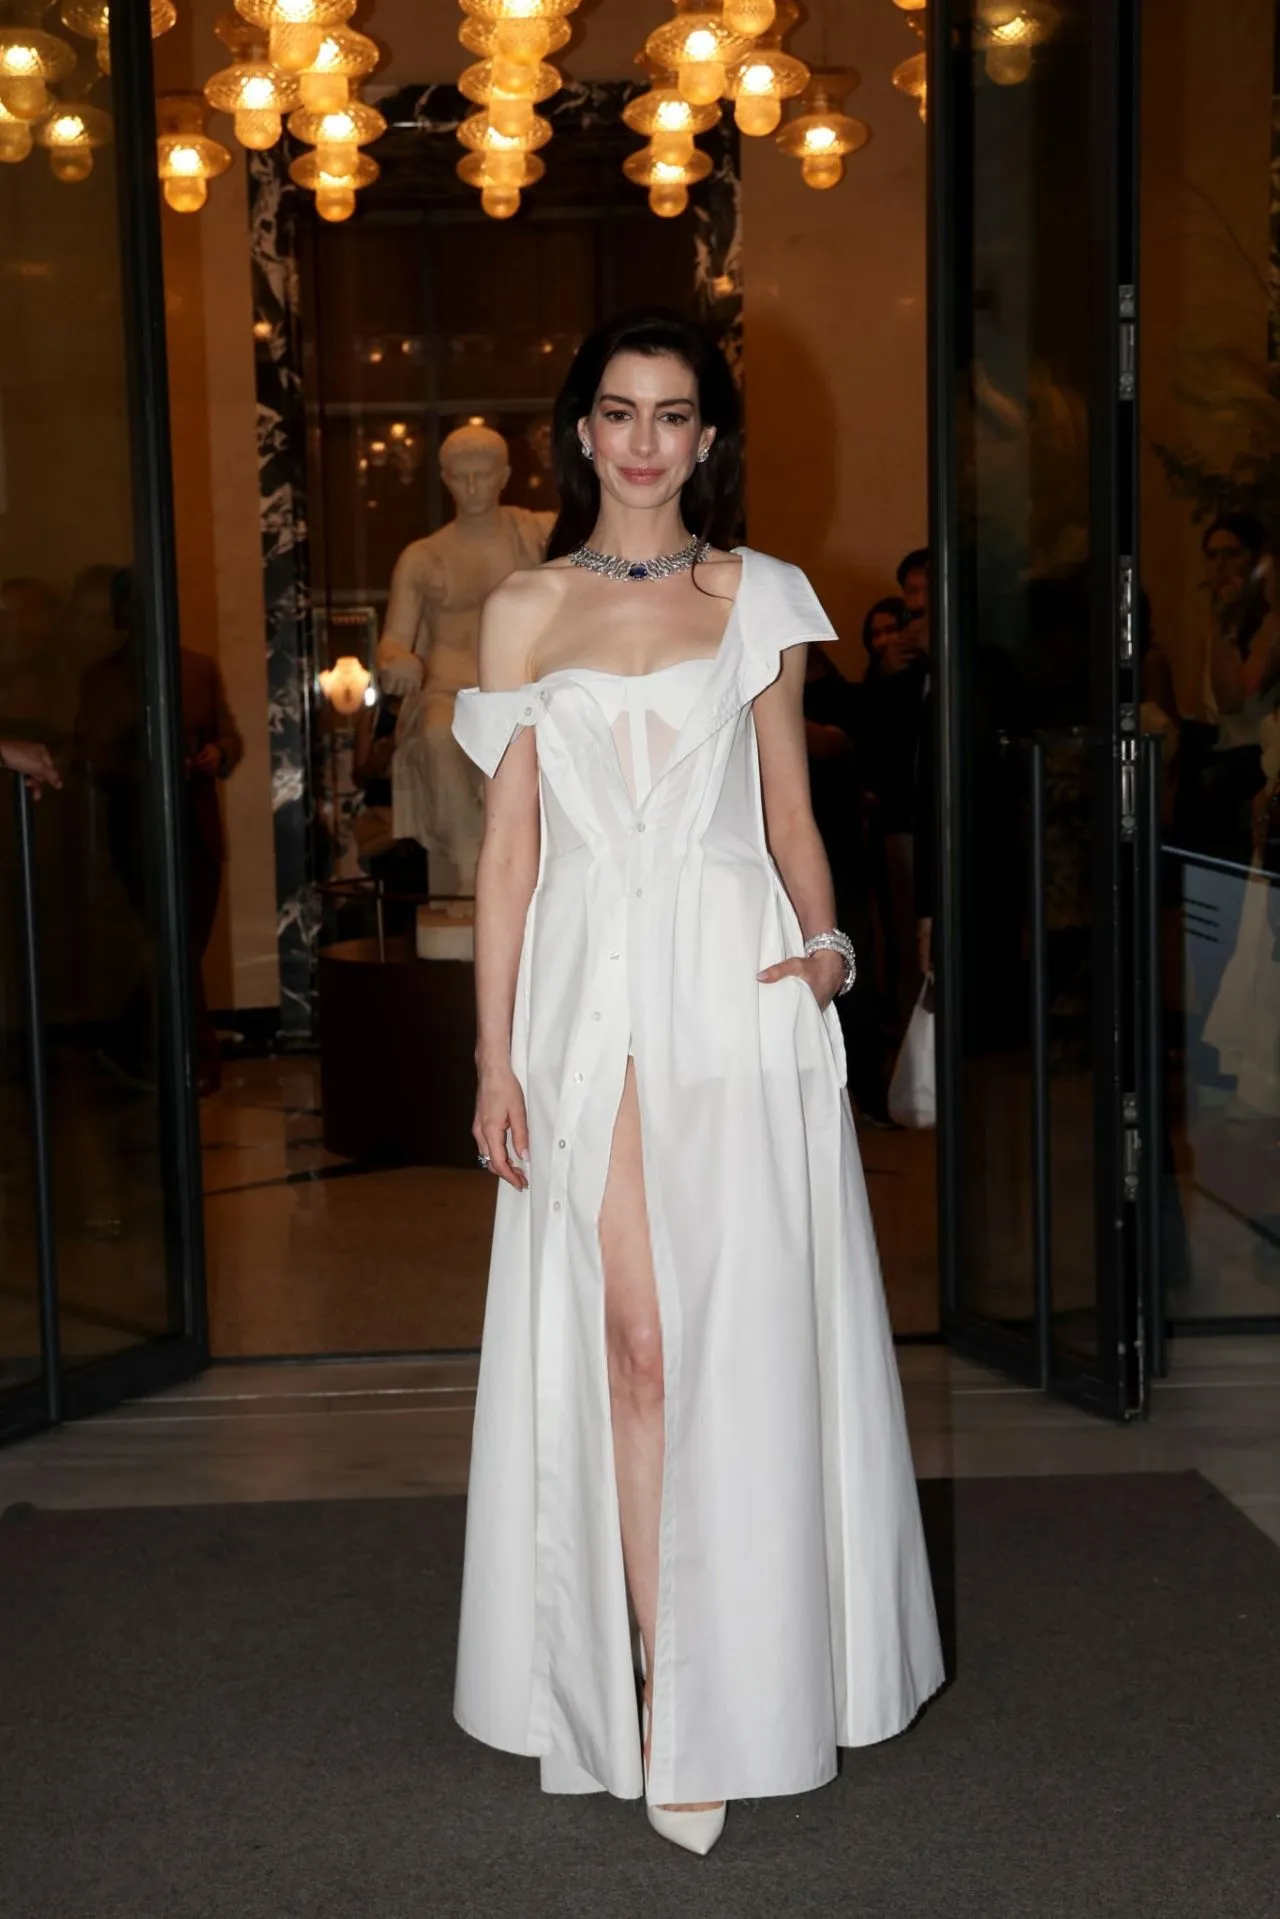 ANNE HATHAWAY IN WHITE DRESS AT THE BULGARI HOTEL IN ROME2